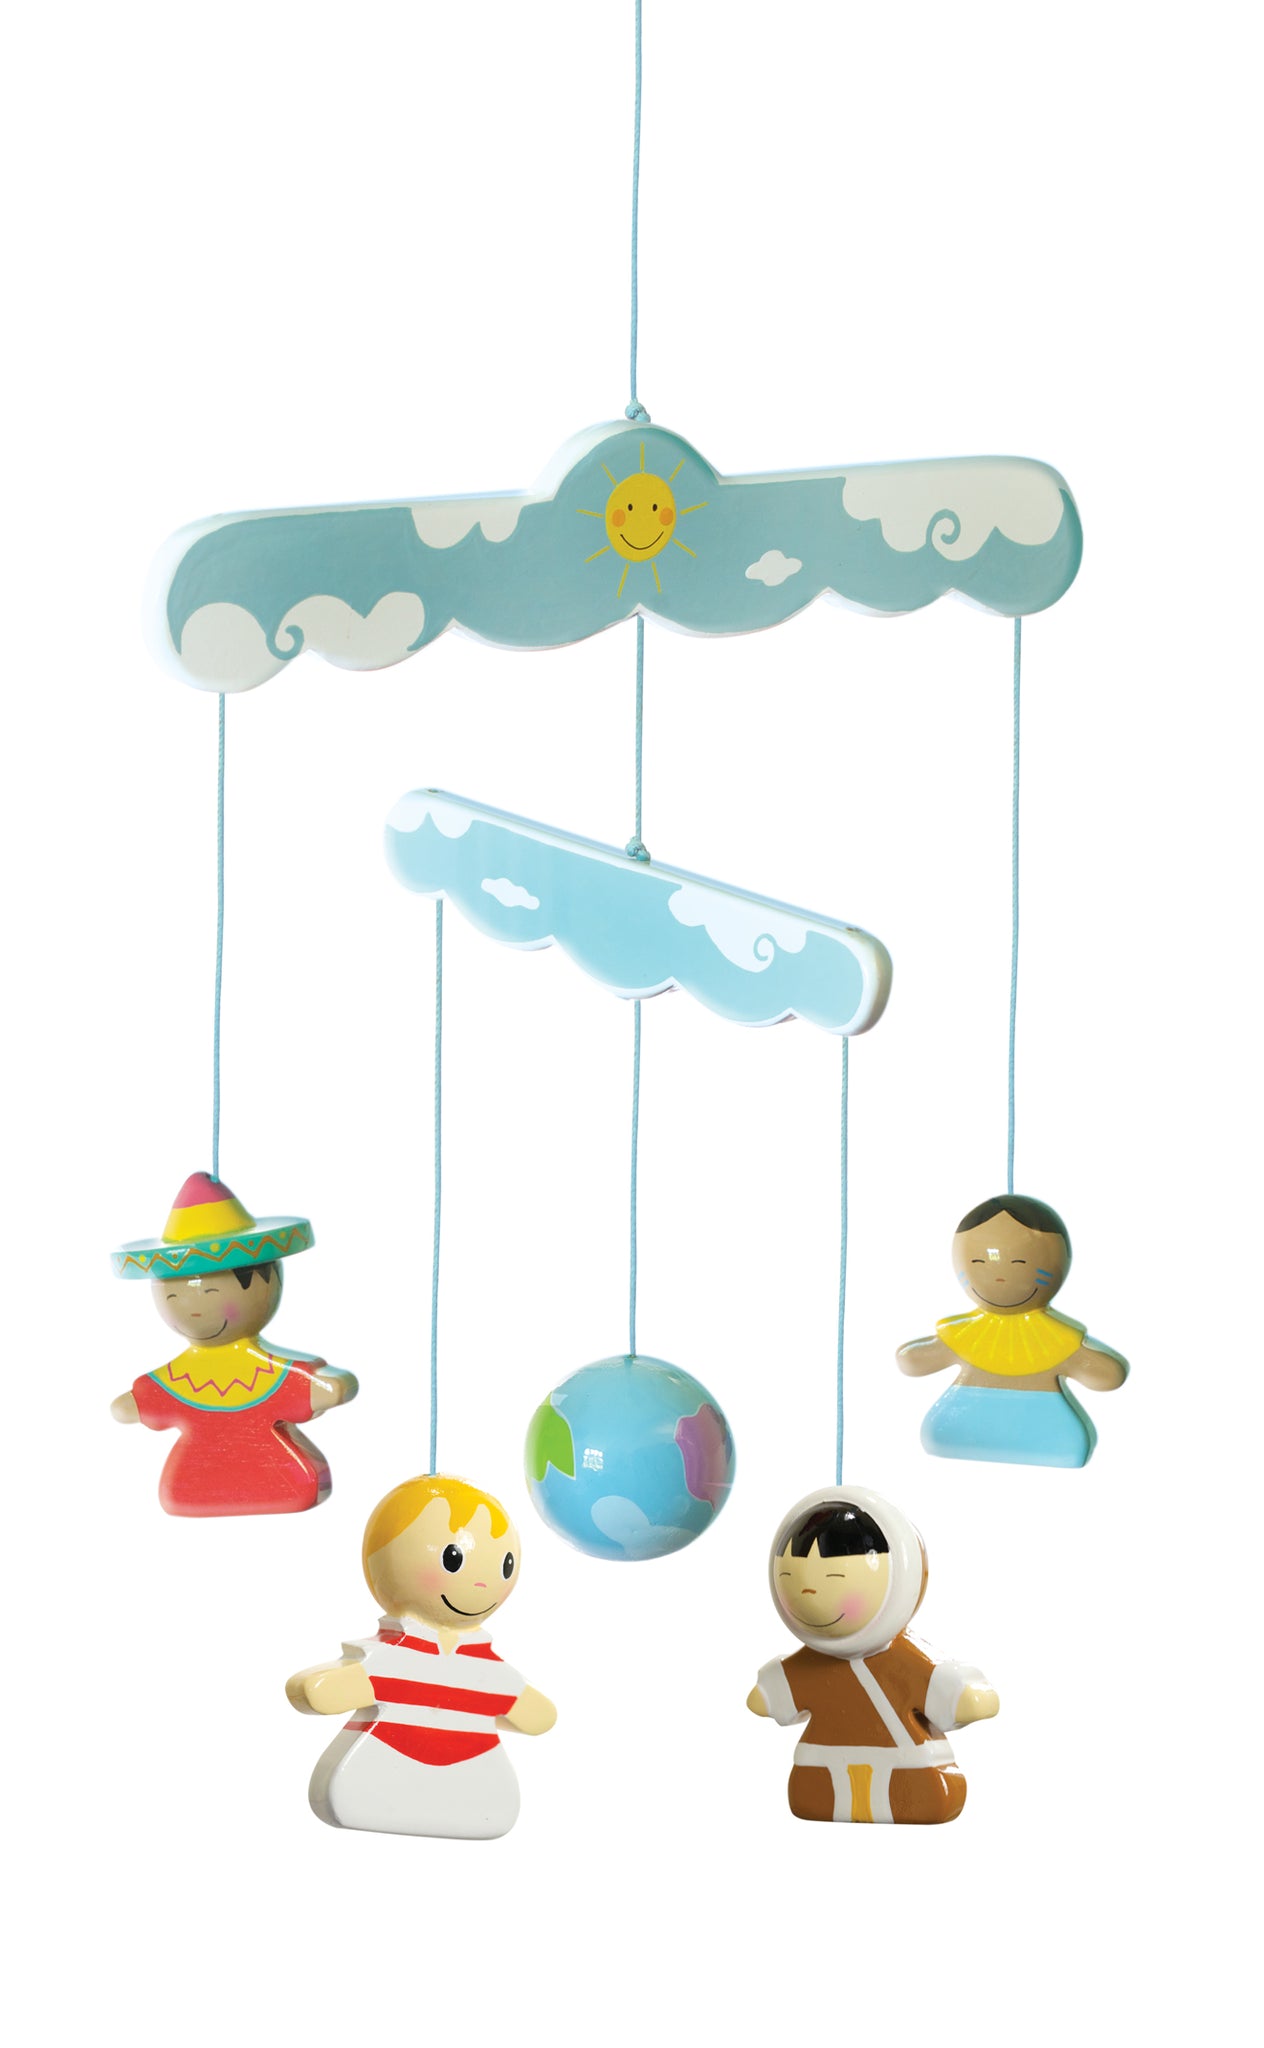 Hand-Painted 3D Wooden Mobile: Children Of The World (Blue) (Ref: 195)Hand-Painted 3D Wooden Mobile: Children Of The World (Blue) (Ref: 195)